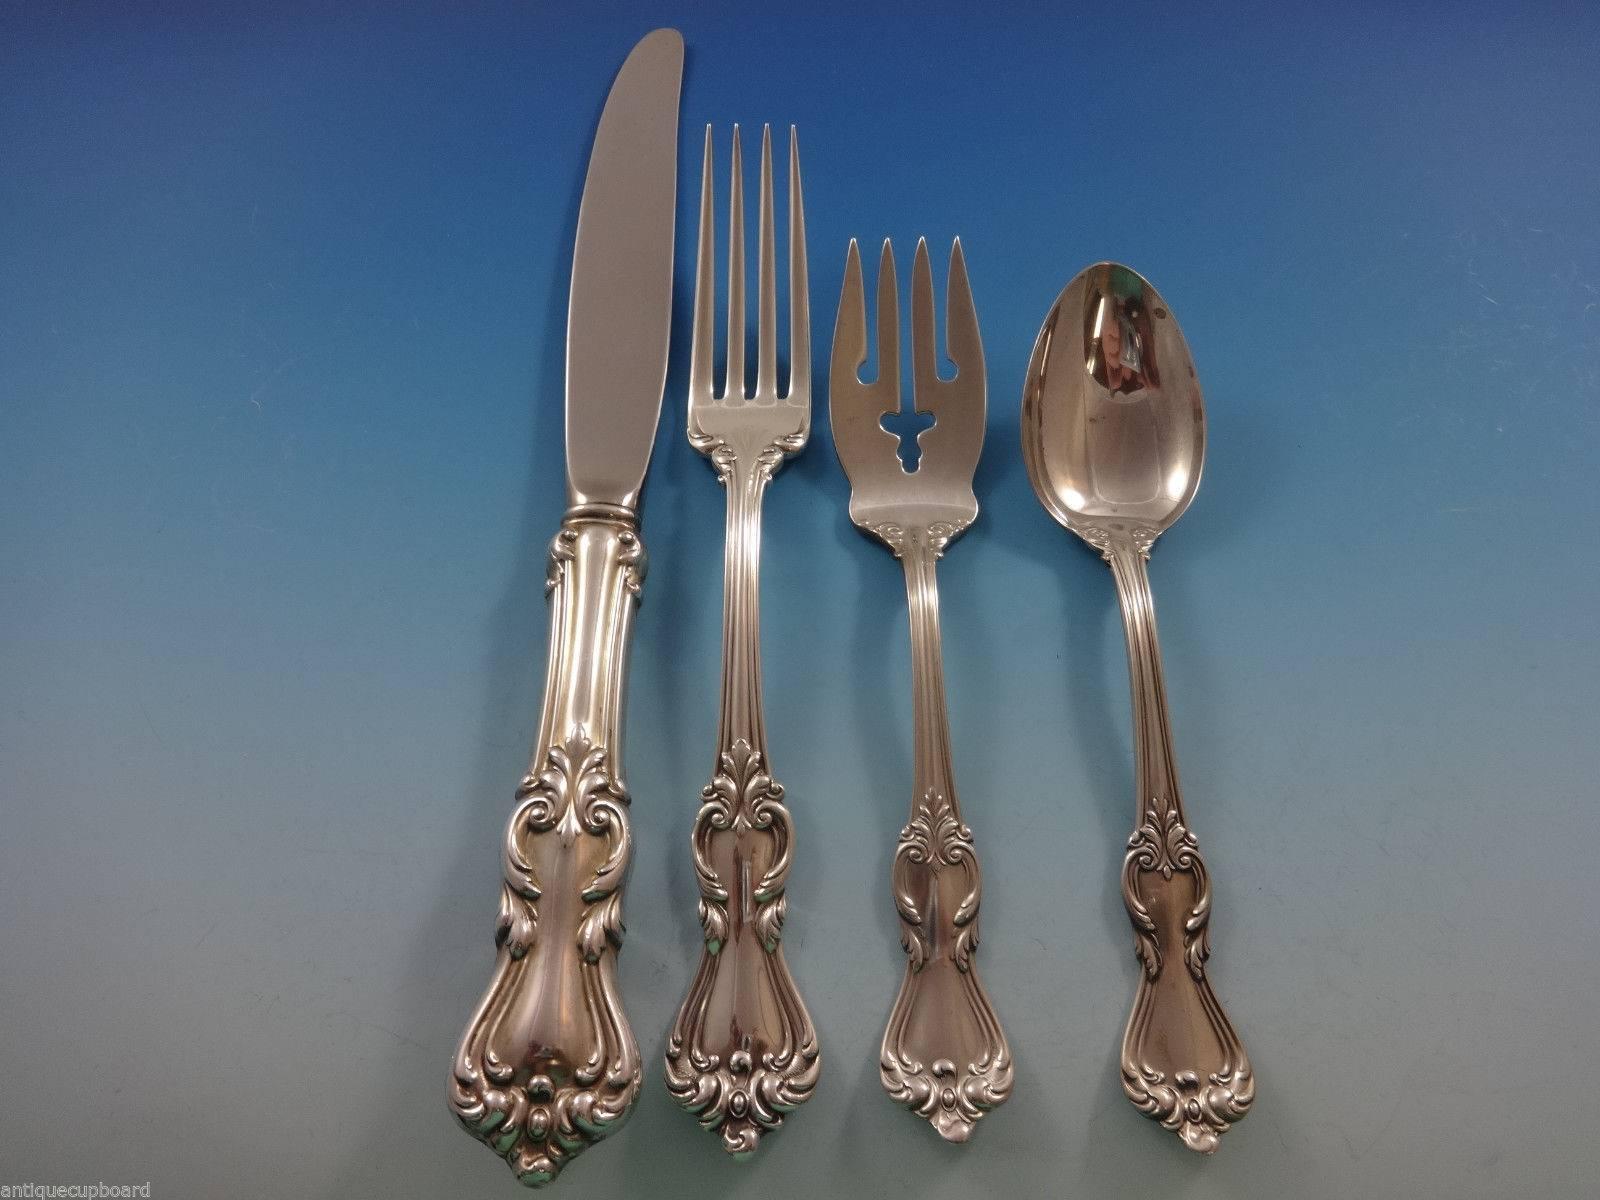 Marlborough by Reed & Barton sterling silver flatware set of 66 pieces. This set includes:

12 knives, 9 1/4